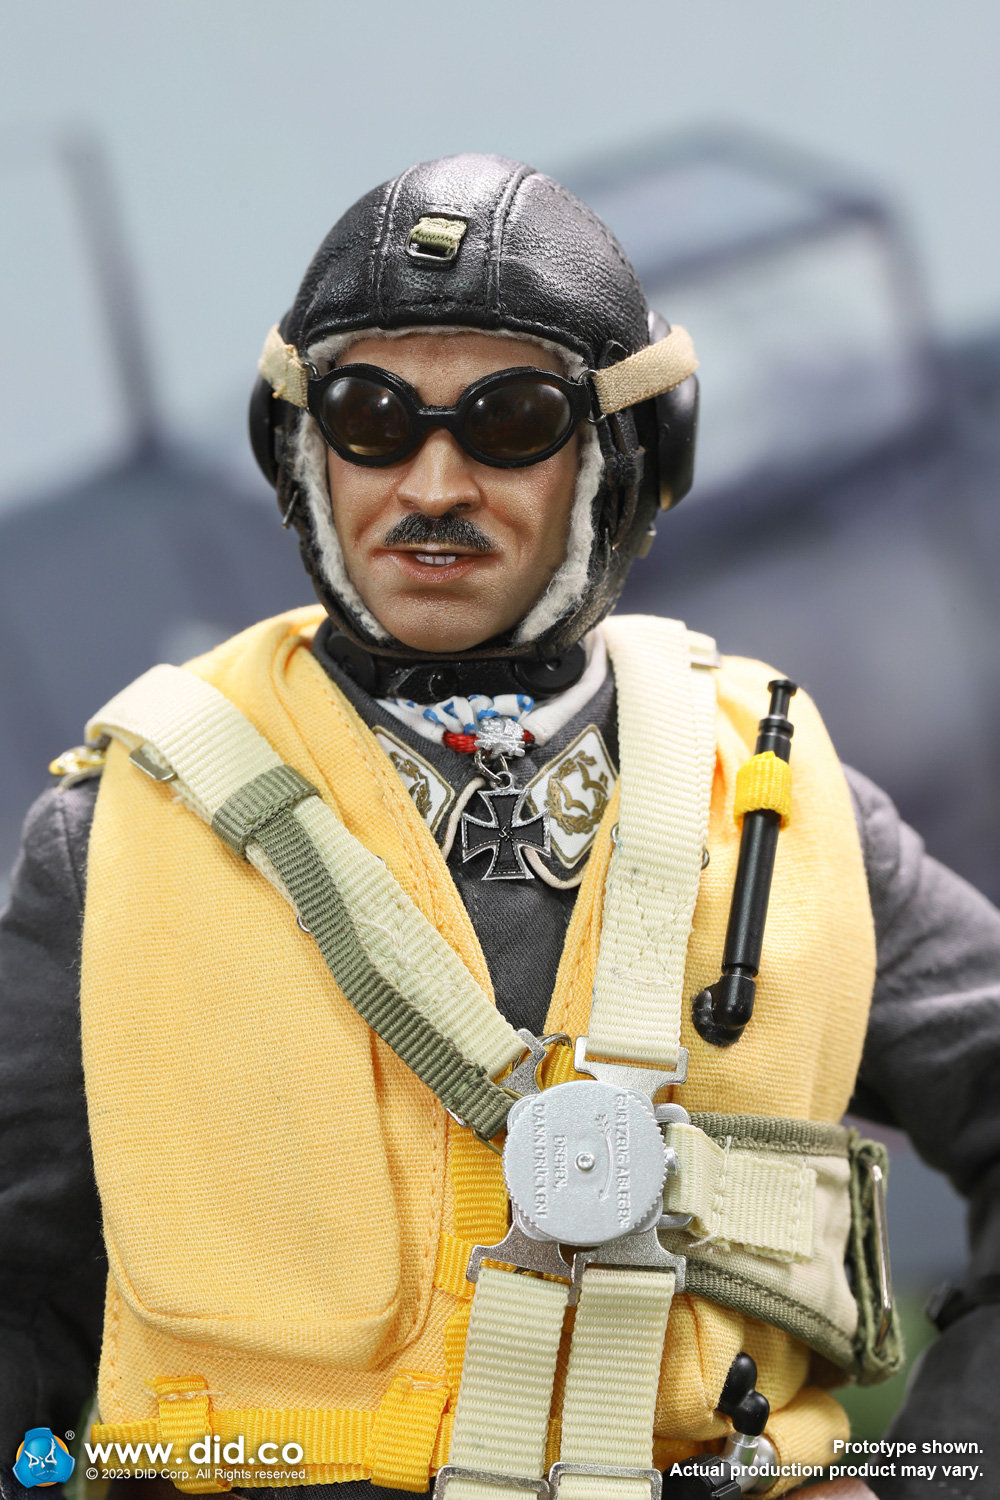 newproduct - NEW PRODUCT: DiD: D80165 WWII German Luftwaffe Ace Pilot – Adolf Galland 1823